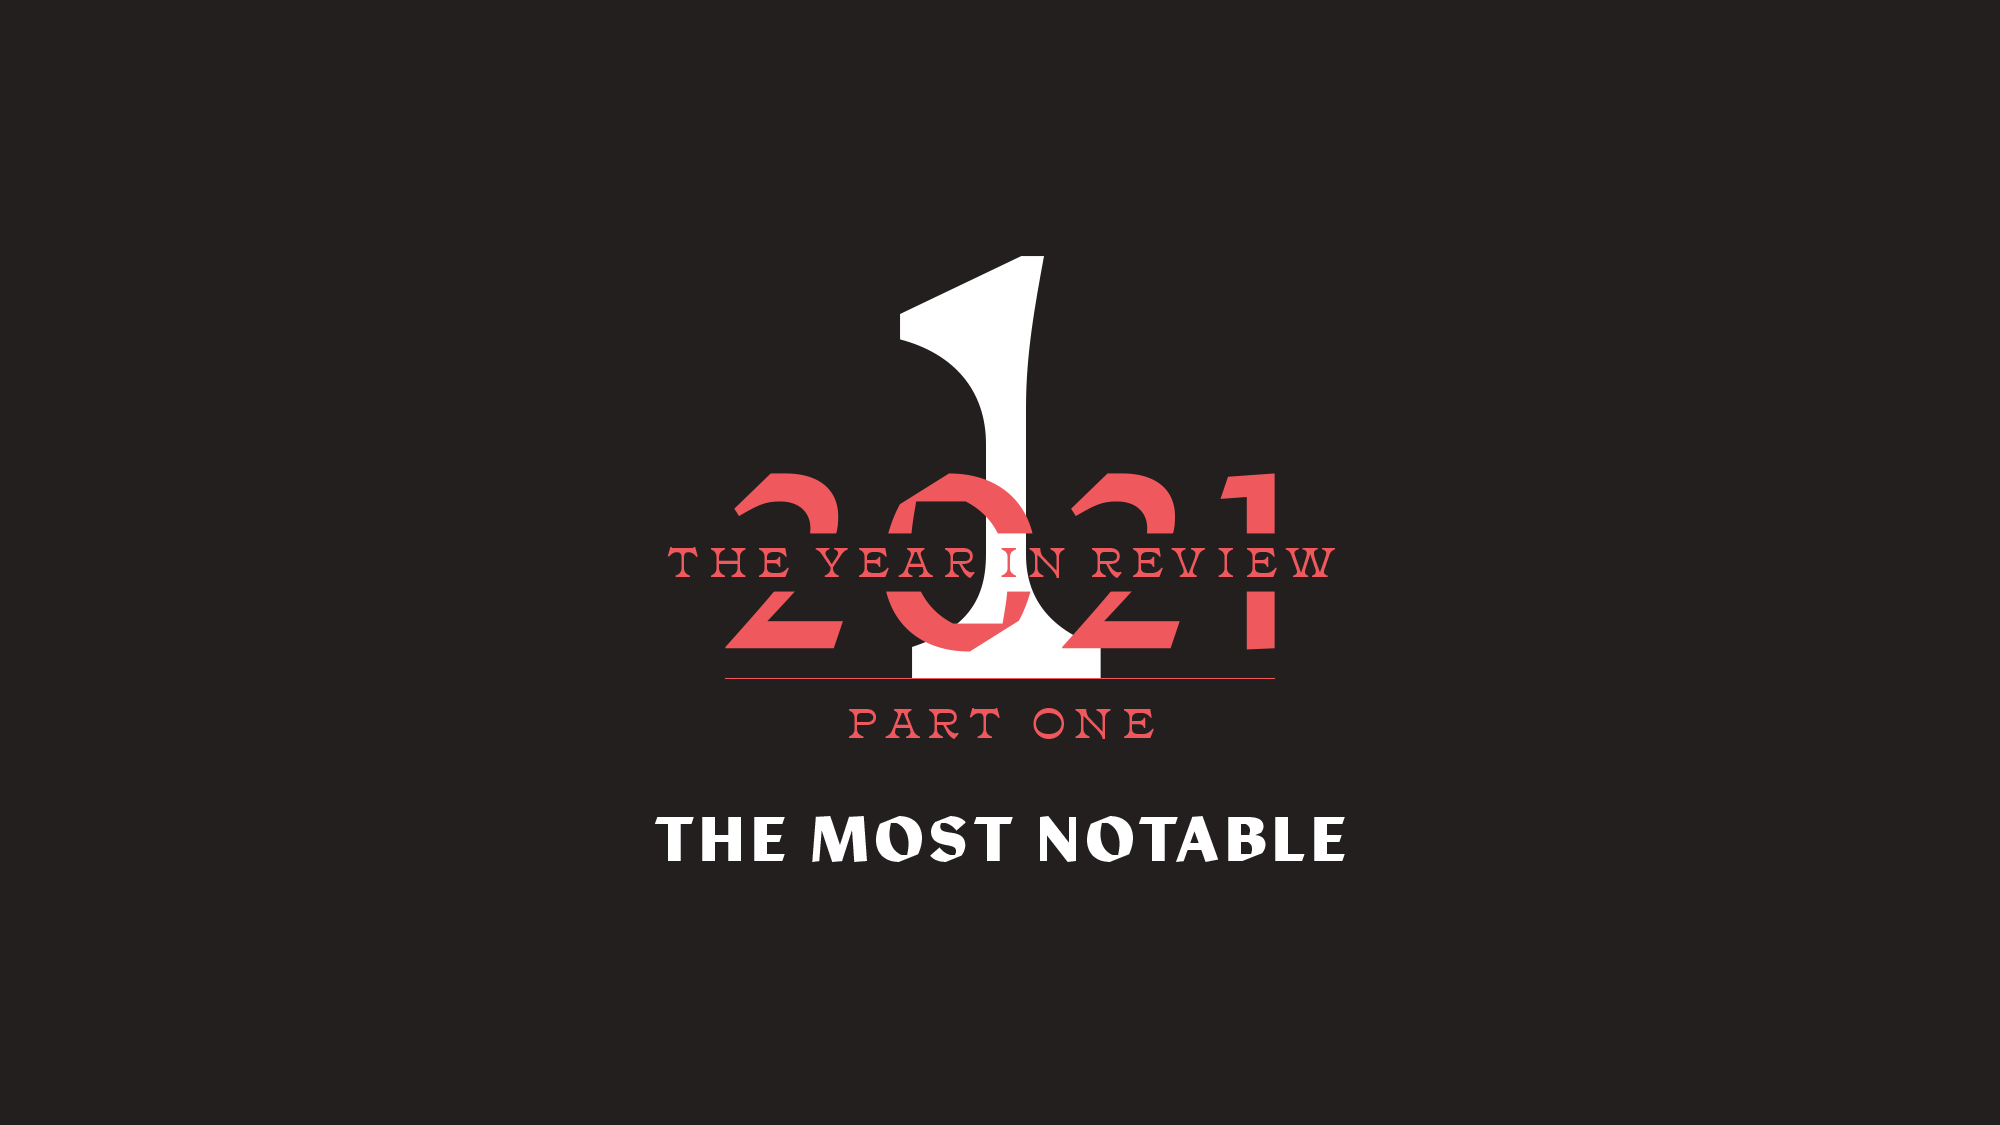 The Year in Review Part 1: The Most Notable